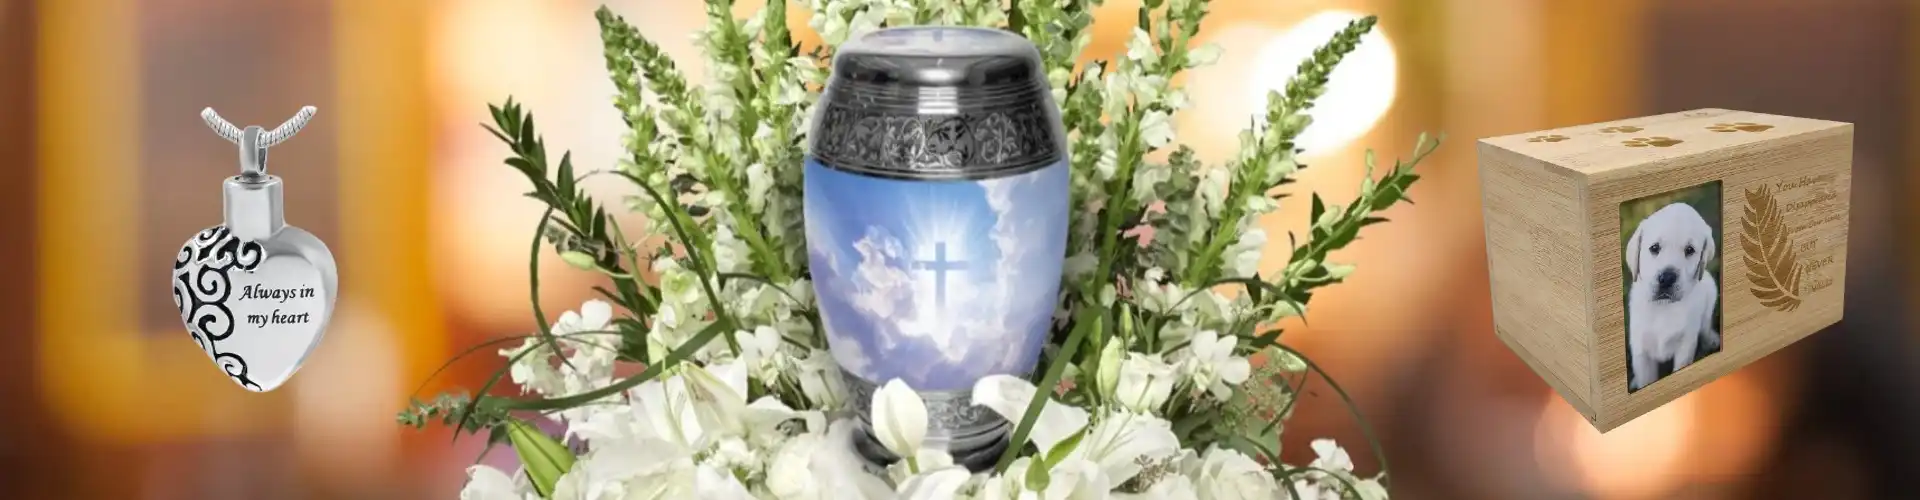 THE URNS FOR ASHES